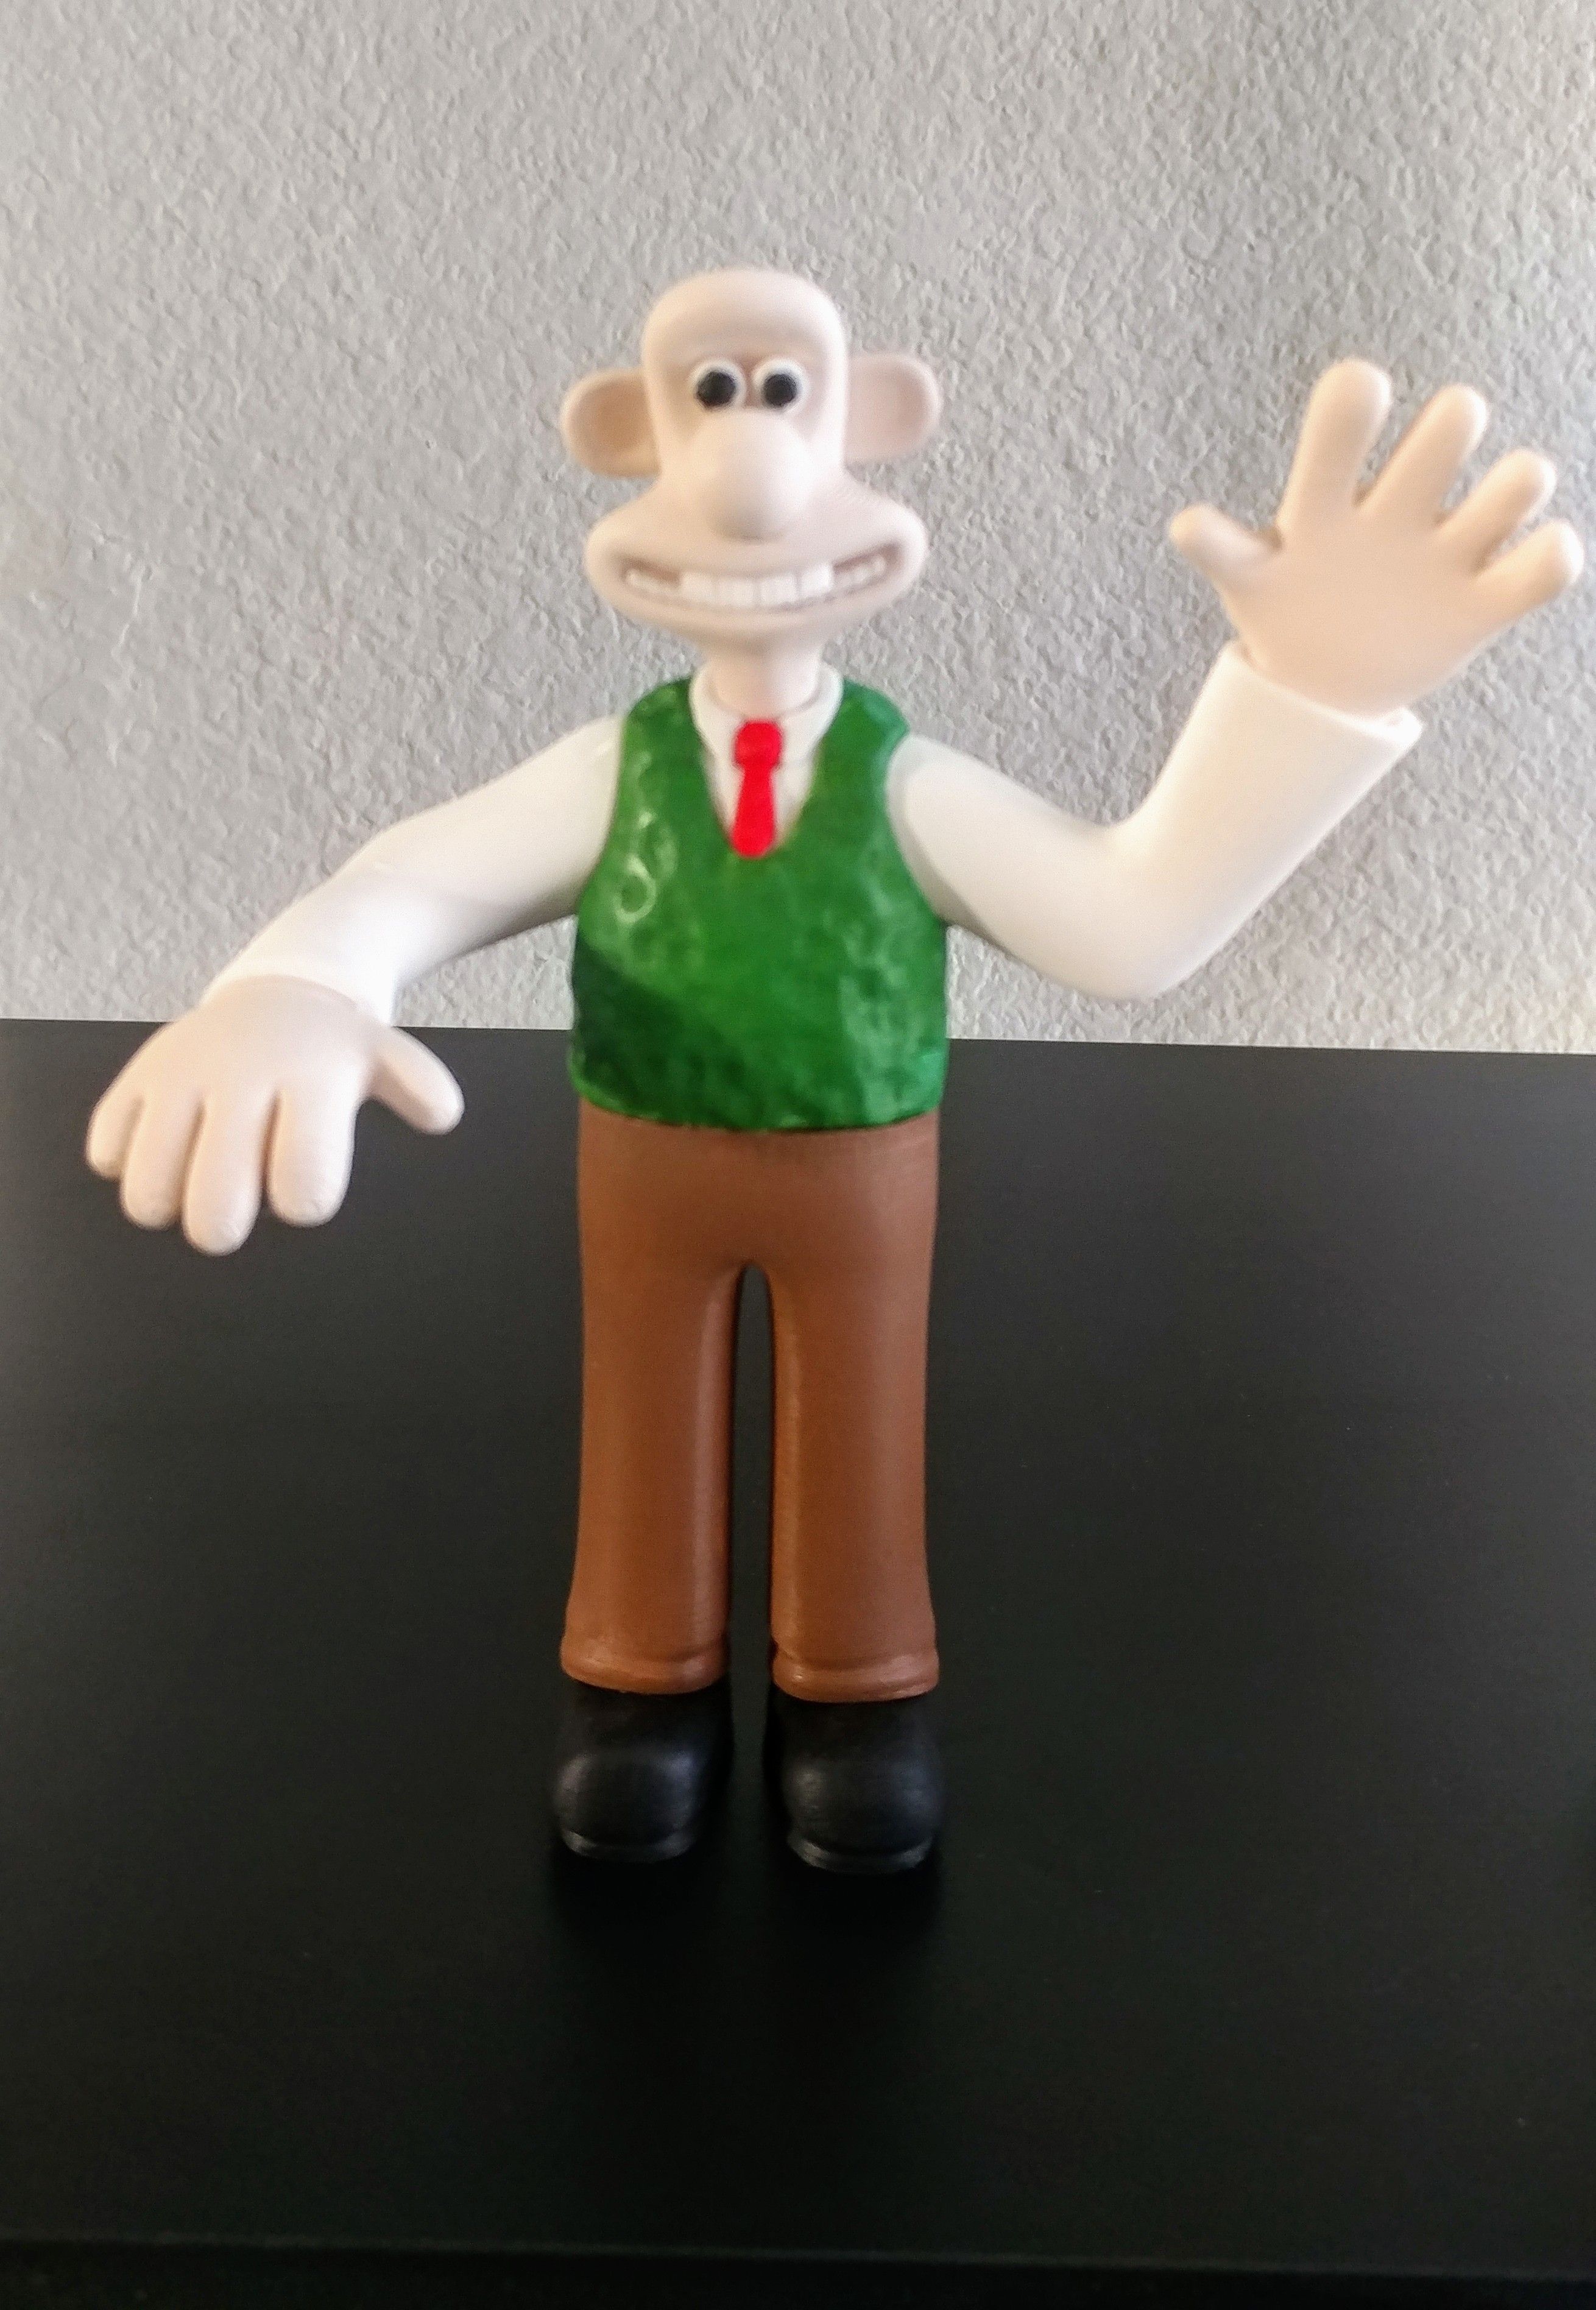 Wallace and Gromit, alanlemus14